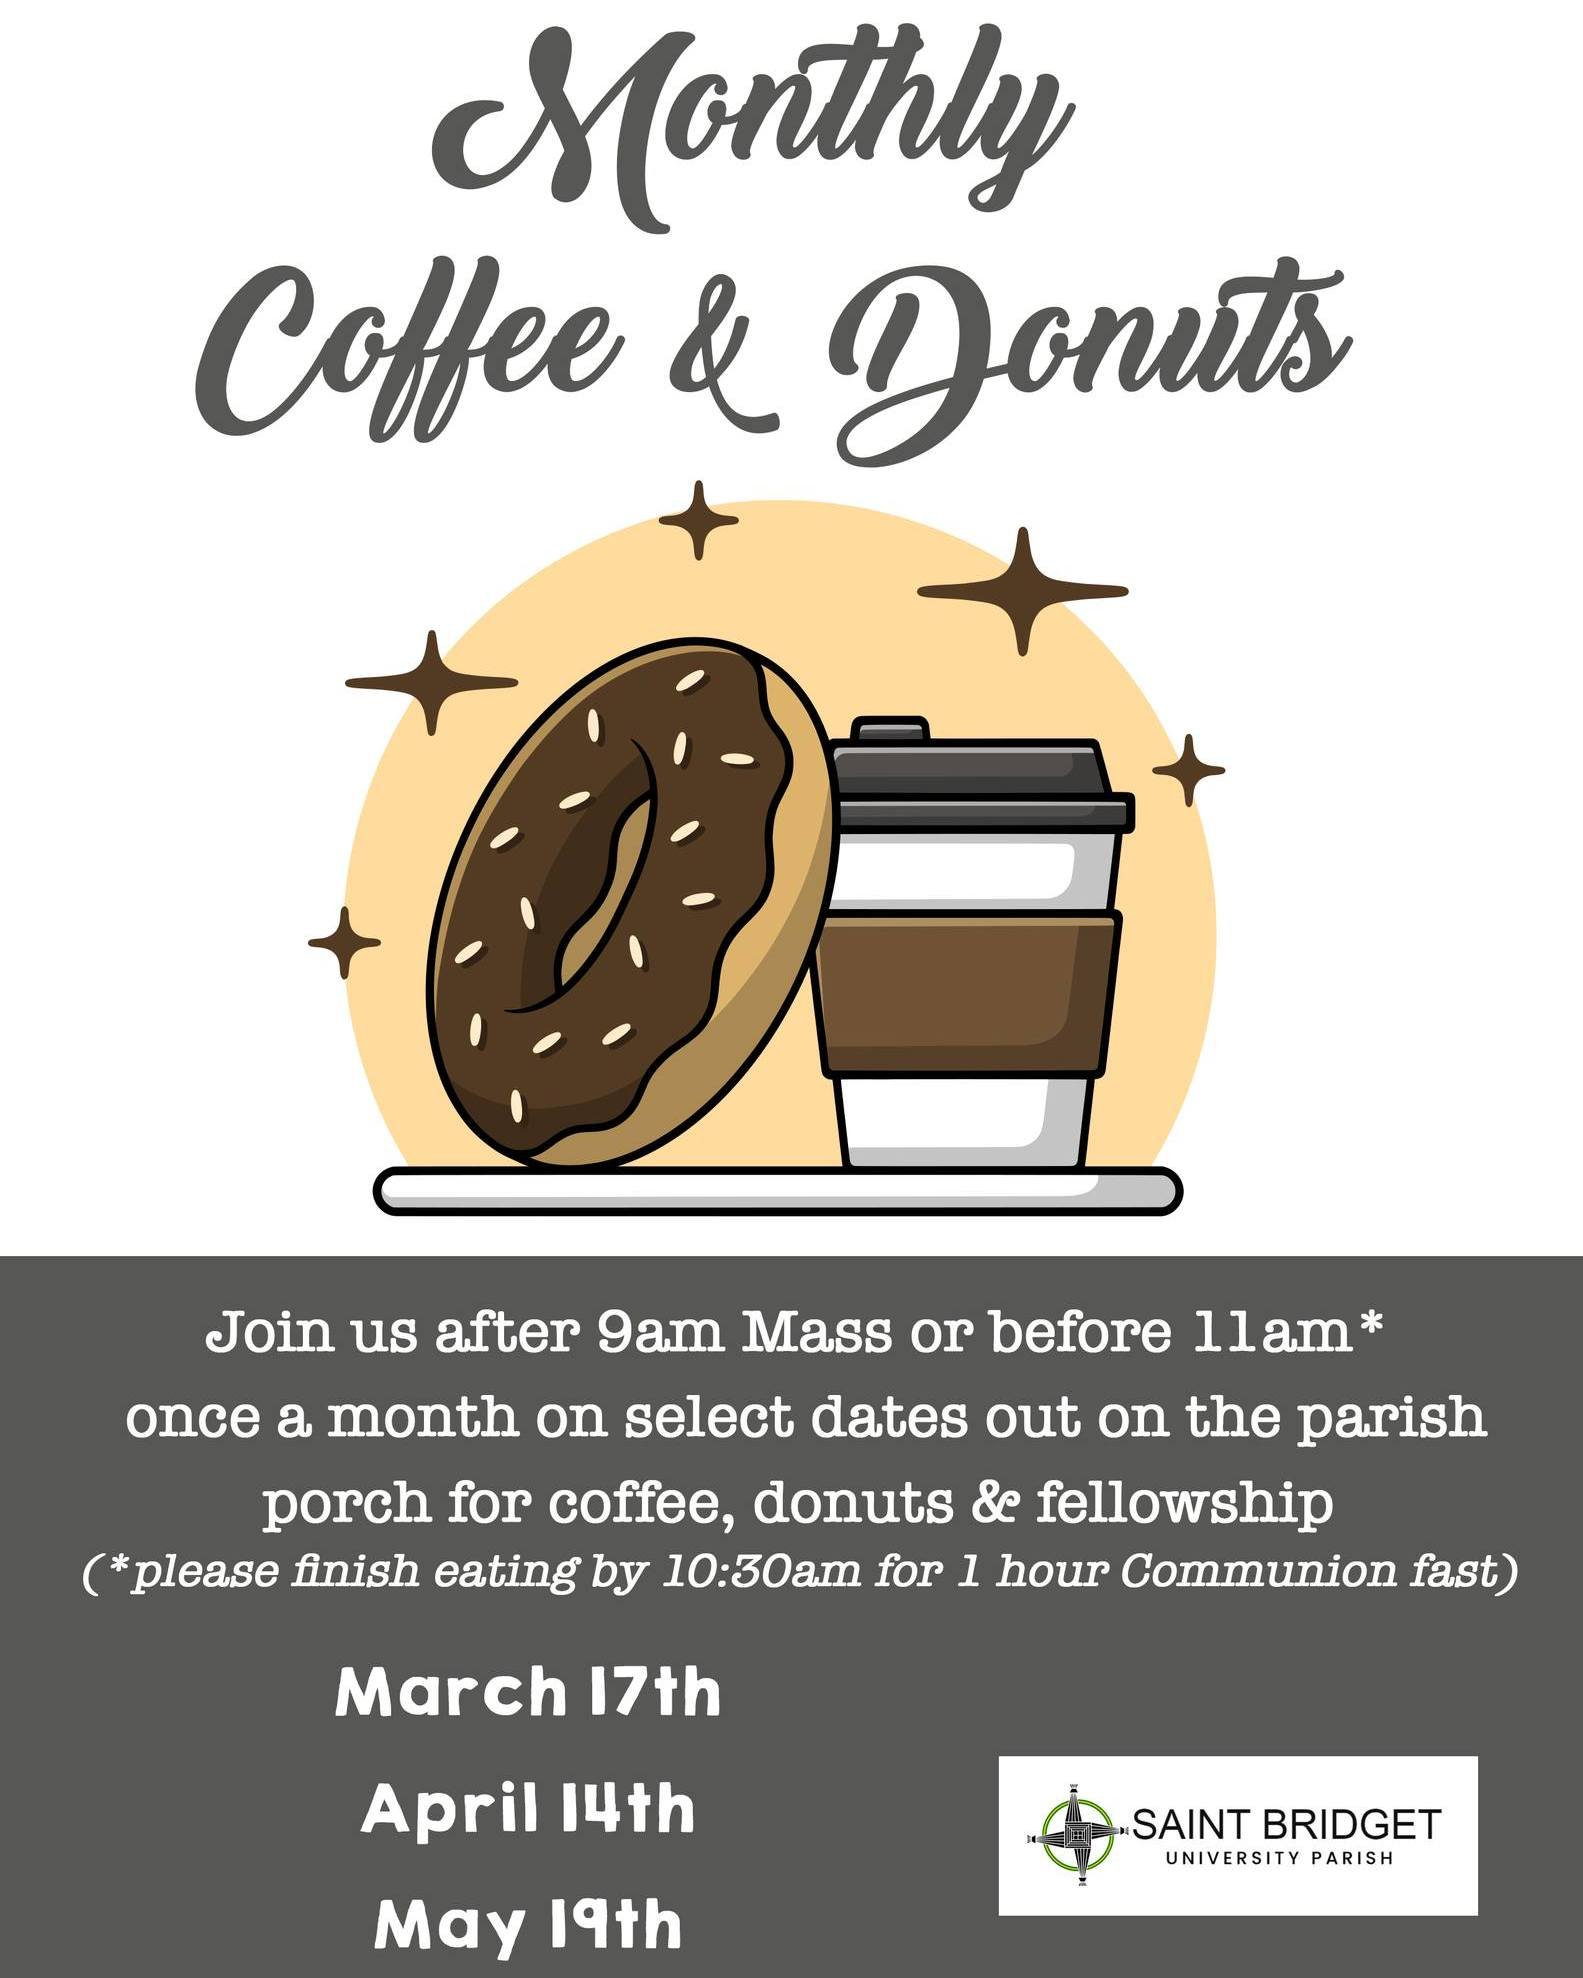 Next Sunday is our monthly Coffee &amp; Donuts Sunday! Join Us after 9am Mass or before 11am on Sunday, out on the parish porch for coffee, donuts &amp; fellowship sponsored by the Parish Staff. (For those attending before the 11am Mass, please finis